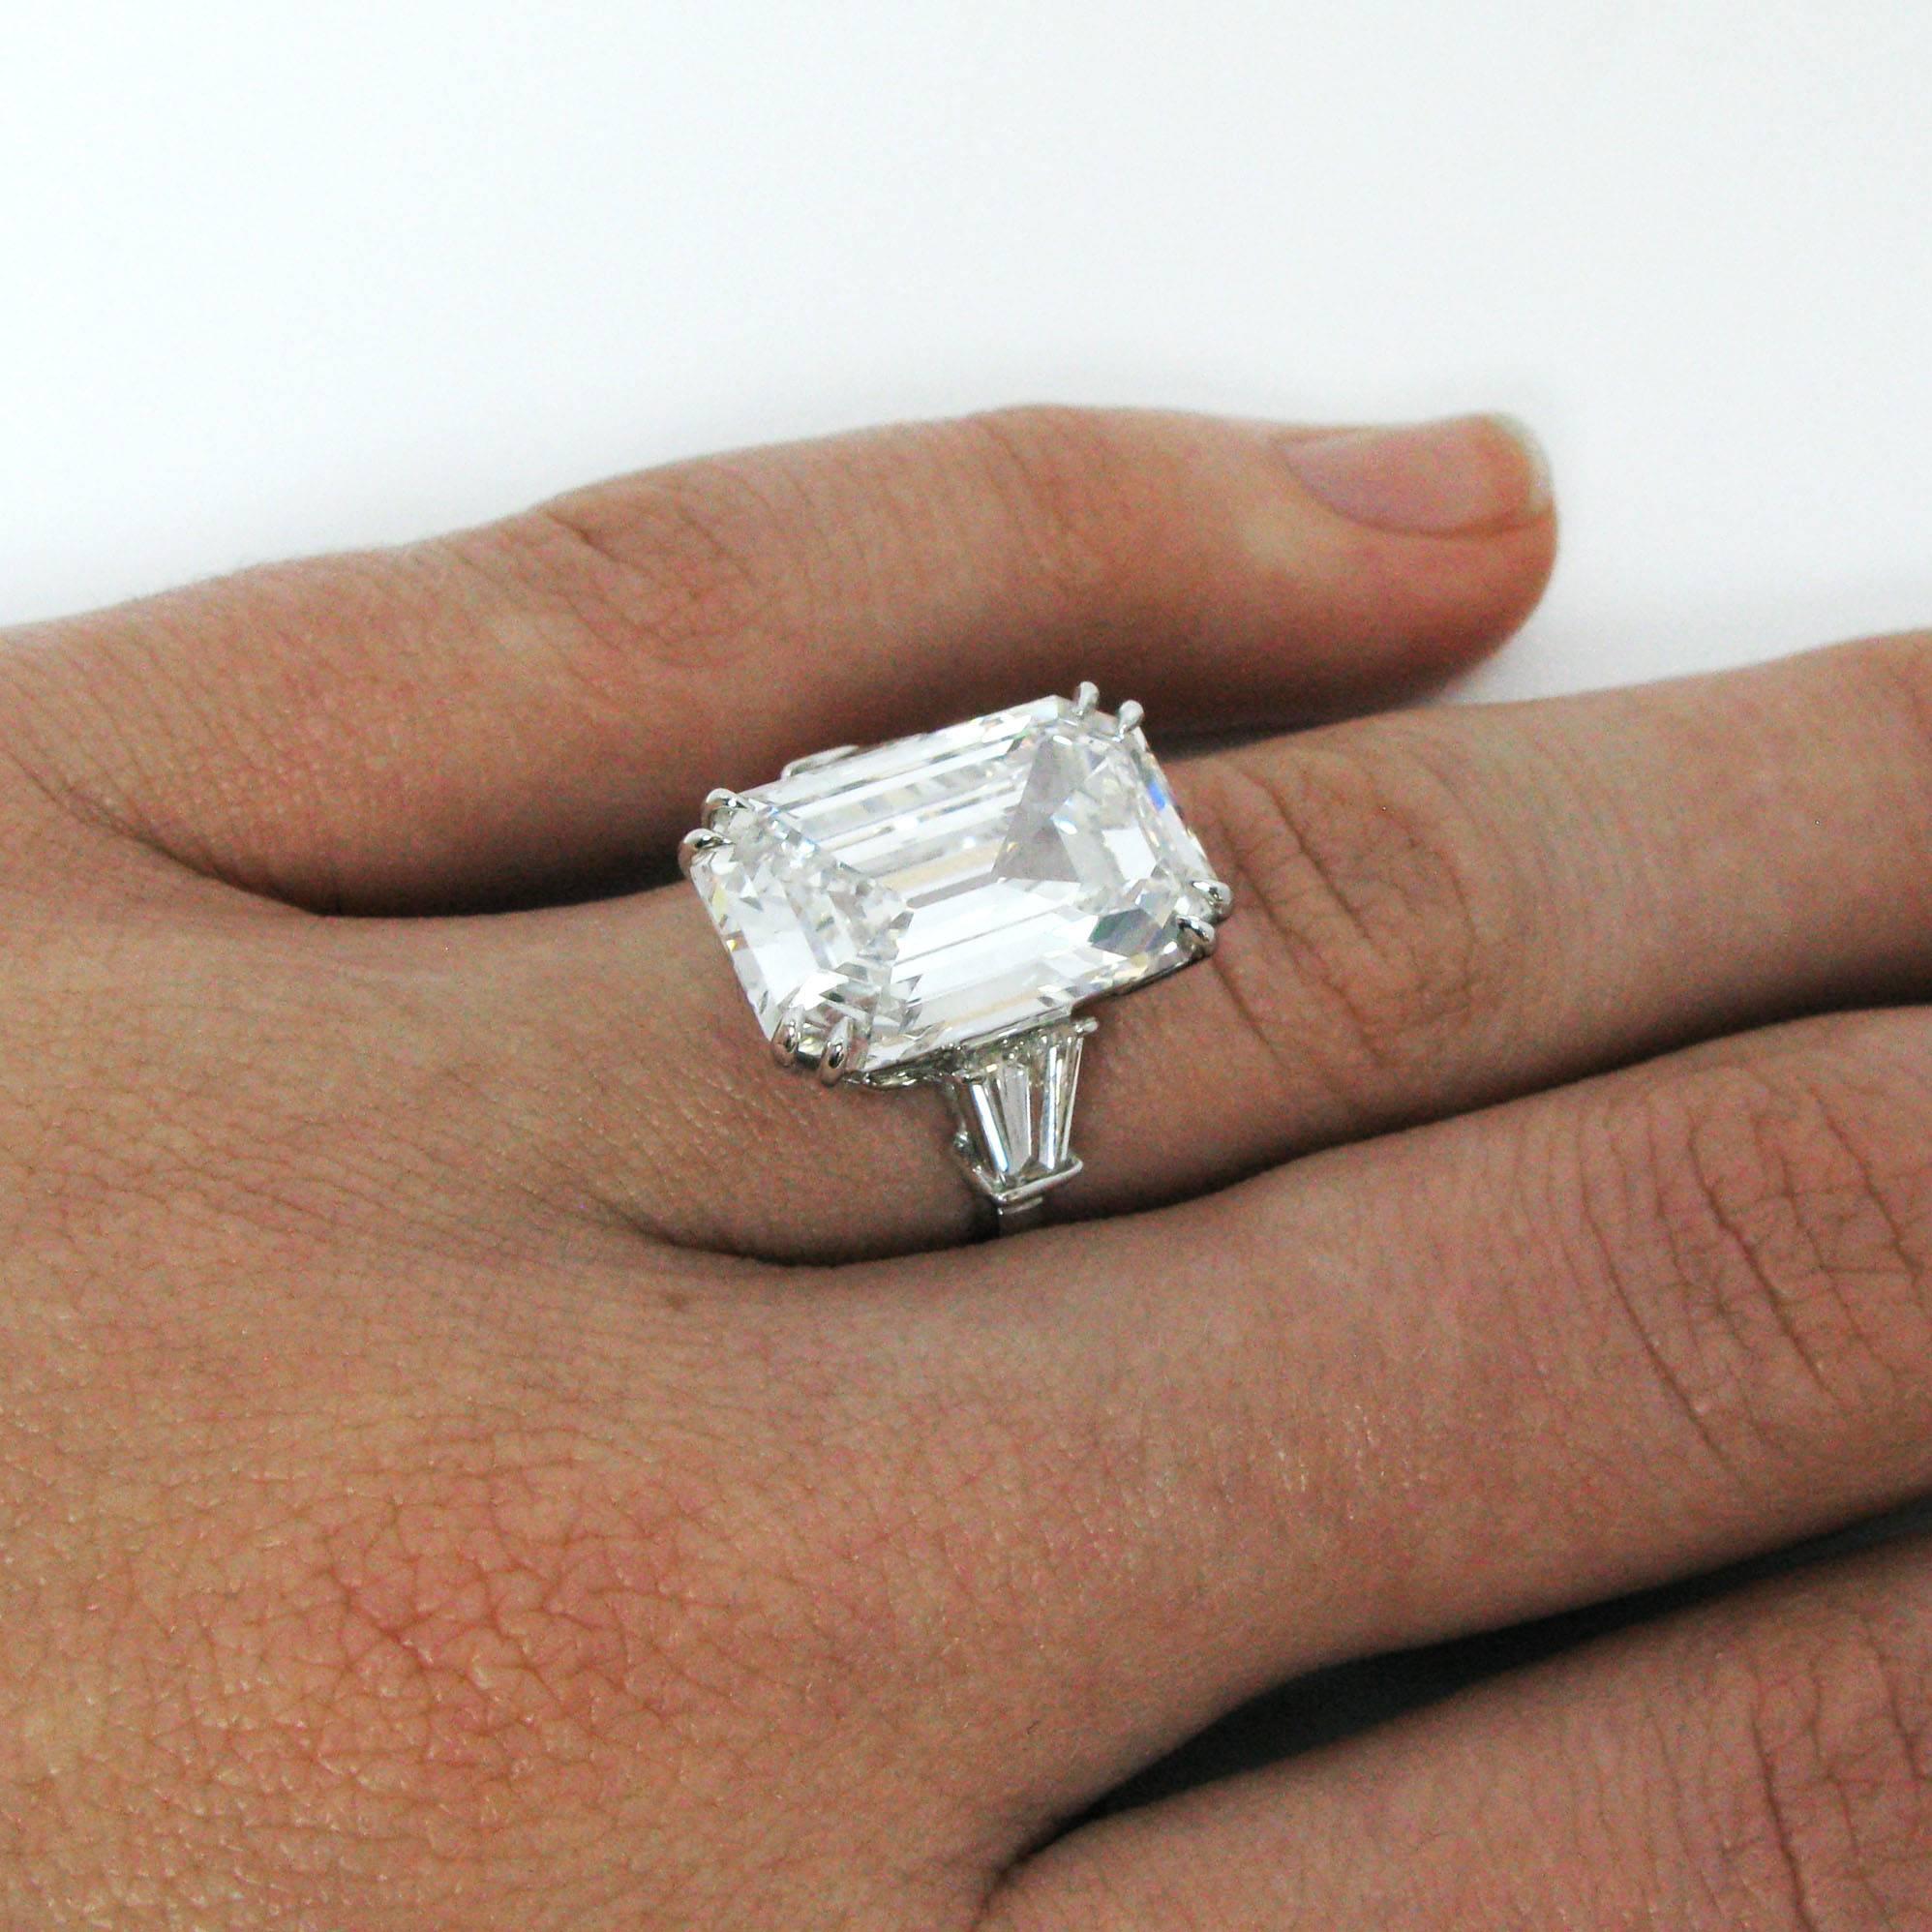 A truly stunning 9.38 carat emerald-cut diamond with F color and VS2 clarity. This stone is set with double claw prongs into a 